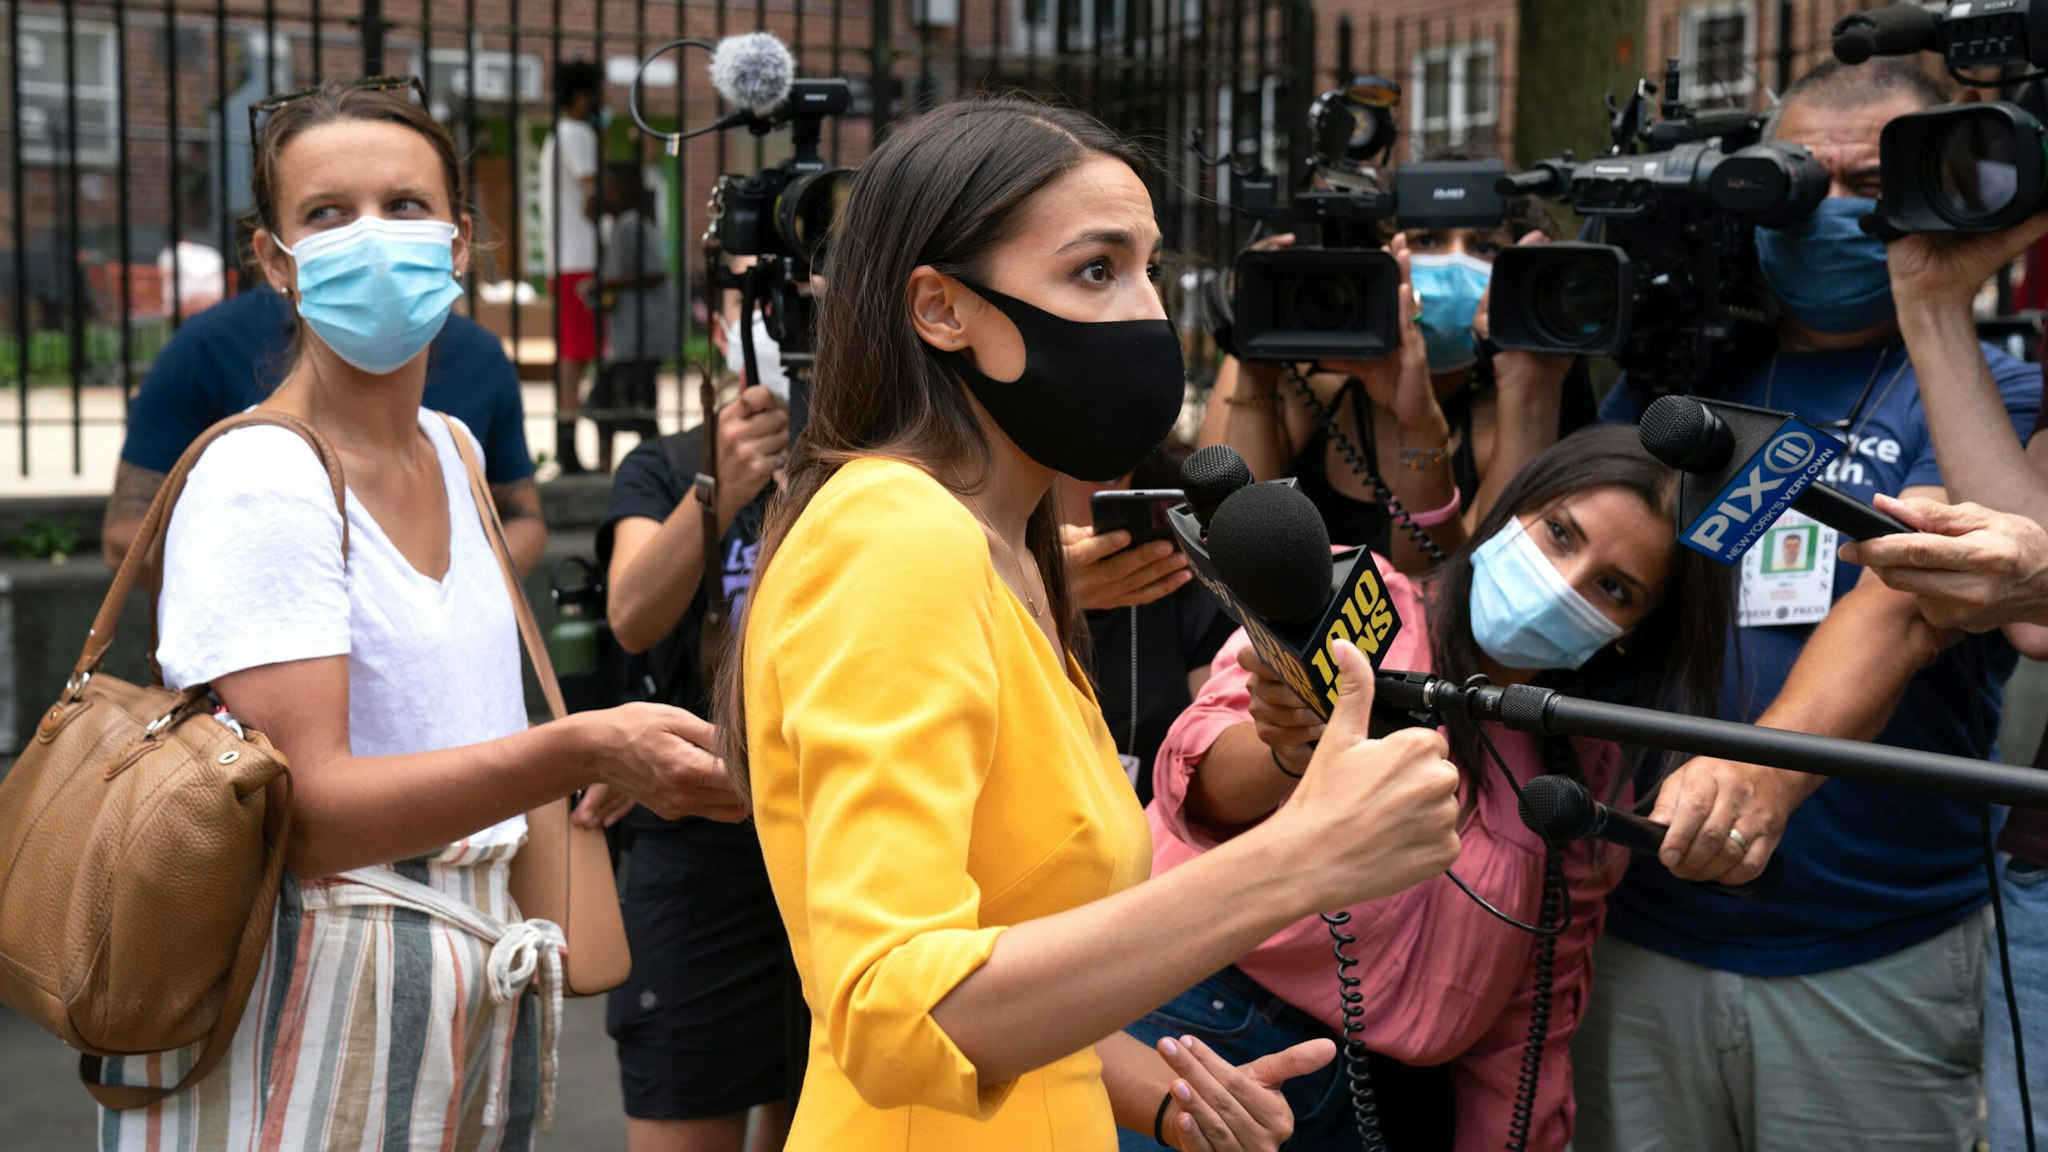 Democratic Rep. Alexandria Ocasio-Cortez, who is running for re-election, speaks with the media as she launches an effort to increase voter registration and 2020 Census participation in New York's 14th Congressional District in the Borough of Queens on August 15, 2020 in New York.